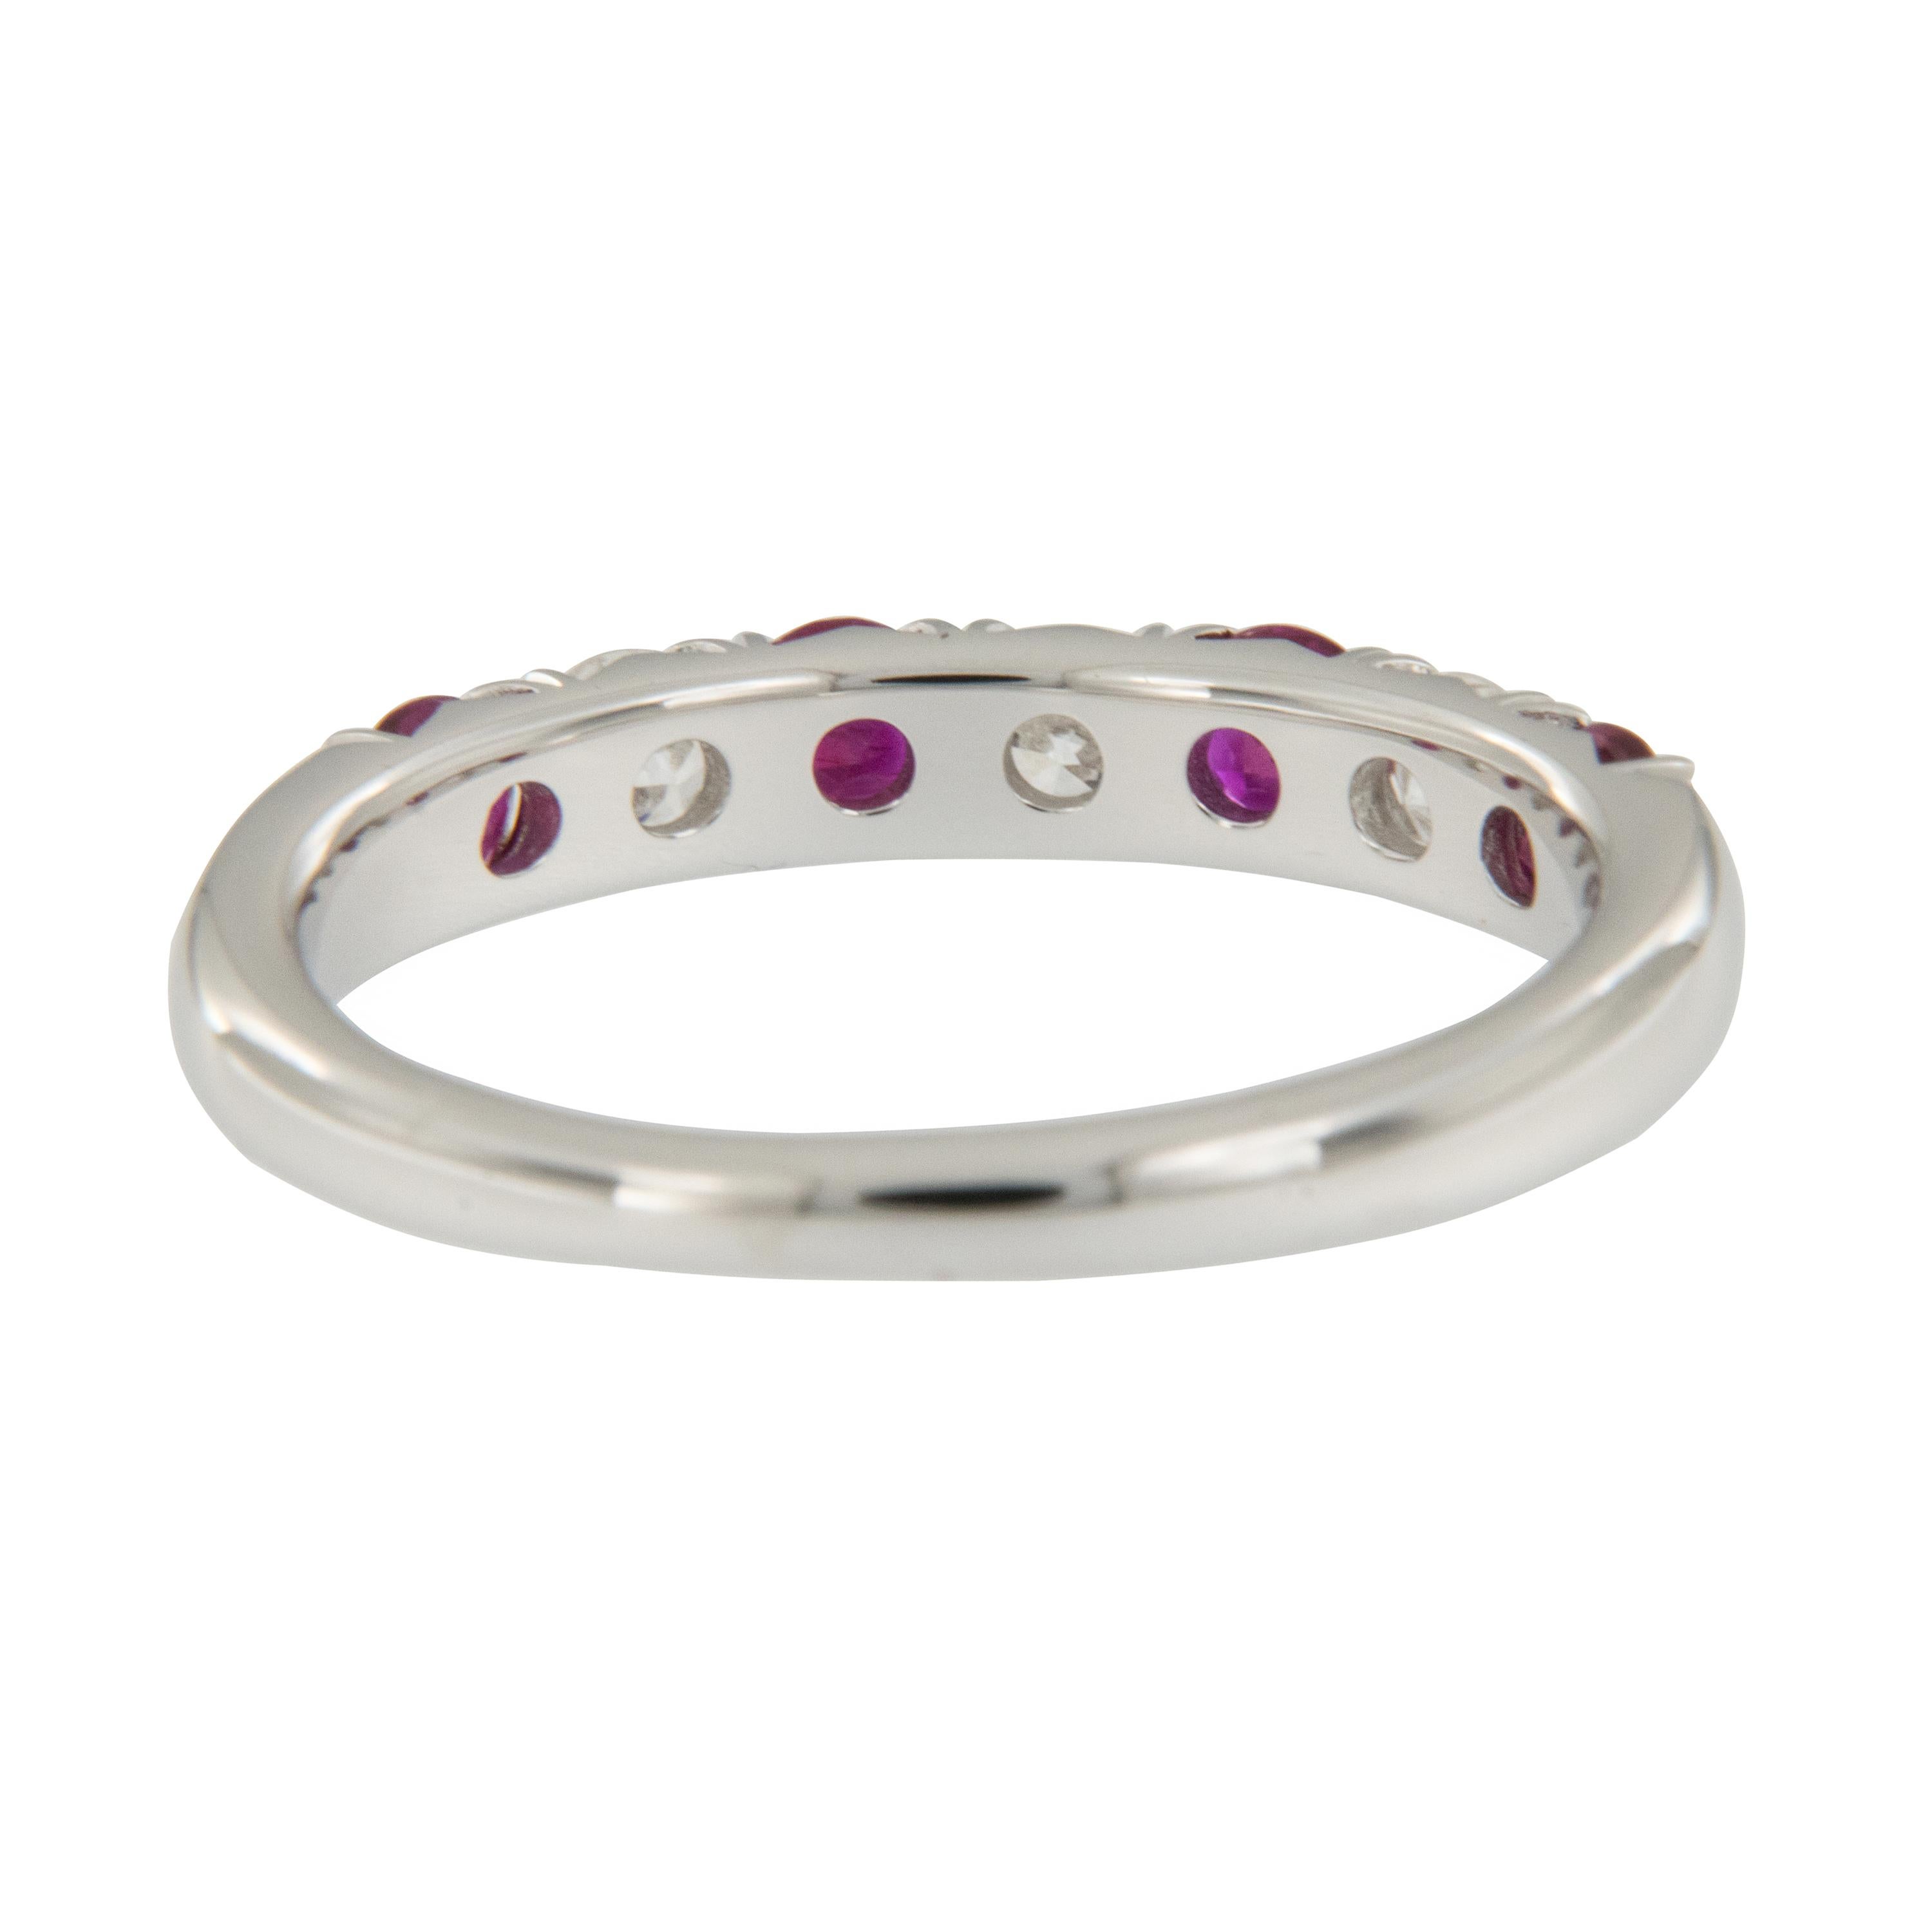 18 Karat White Gold Ruby & Diamond Stackable Band Ring by Spark Creations In New Condition For Sale In Troy, MI